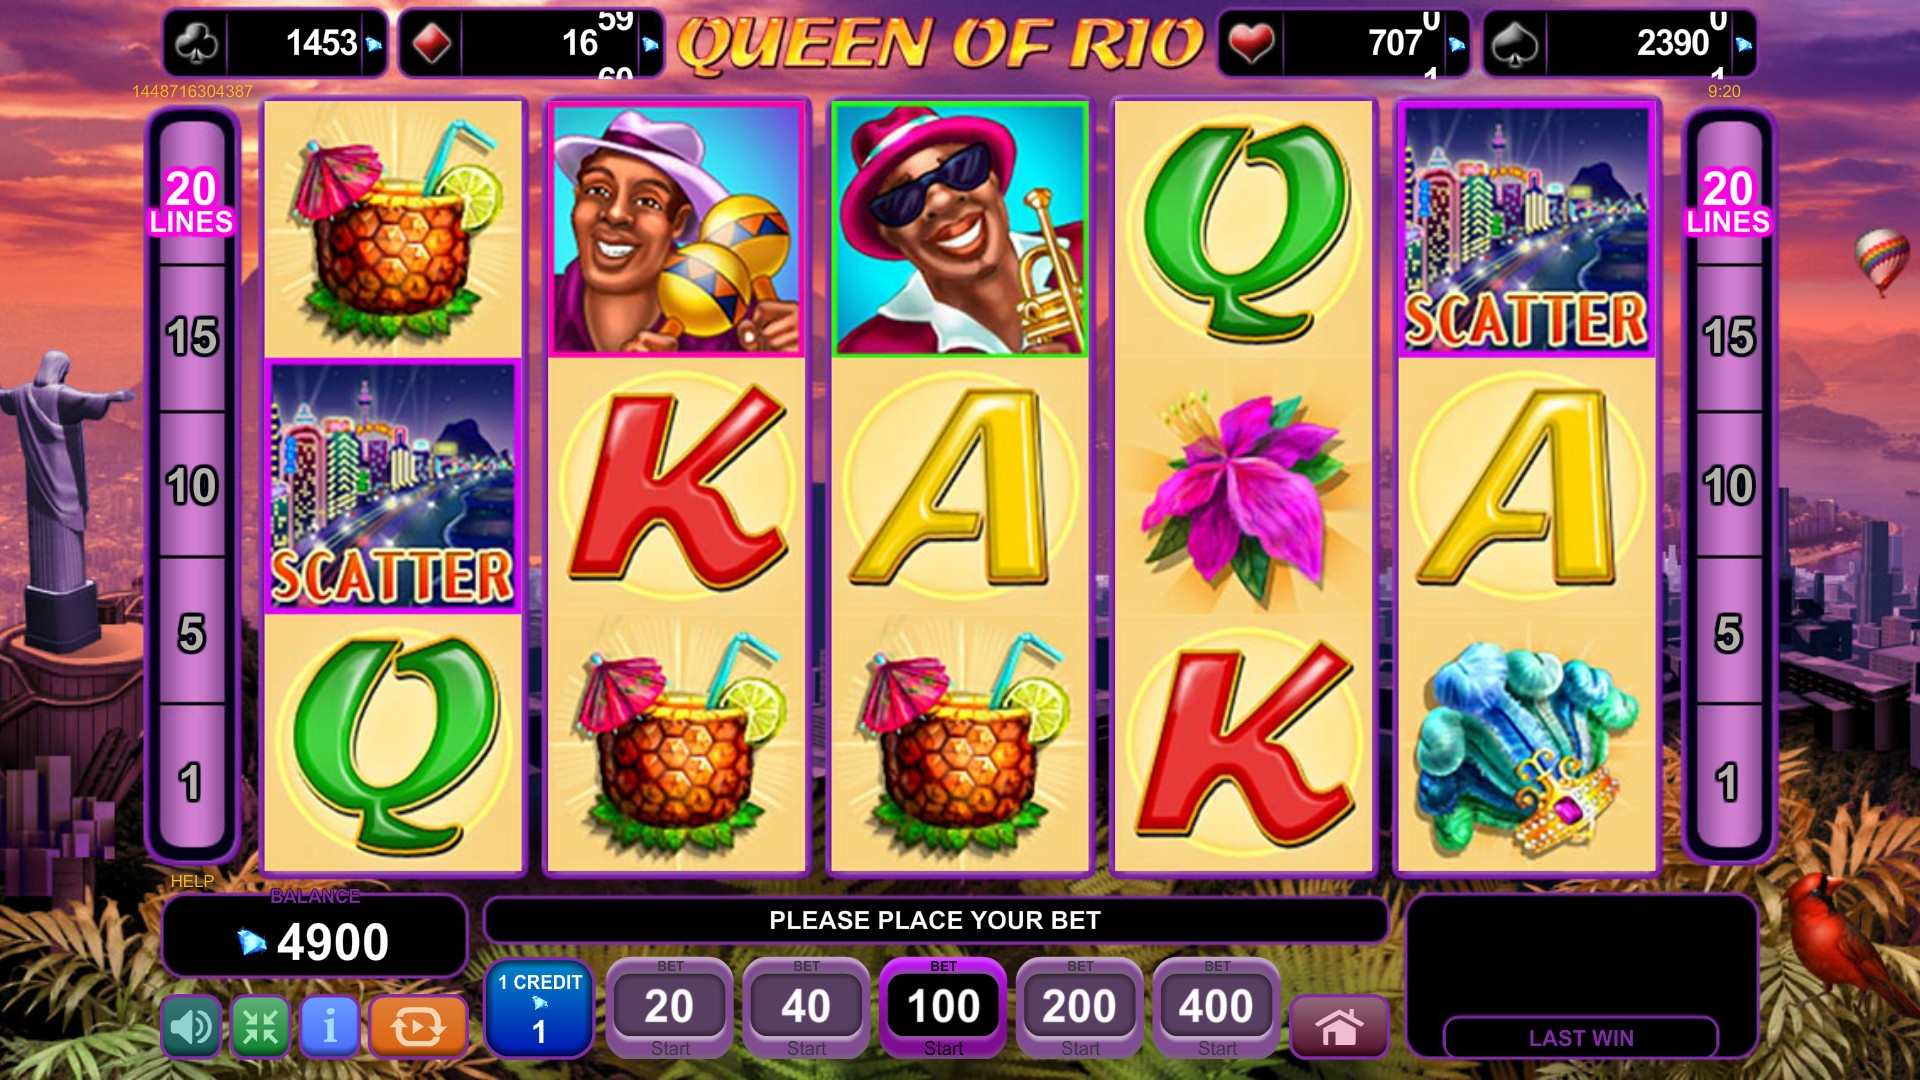 Queen of Rio (Queen of Rio) from category Slots